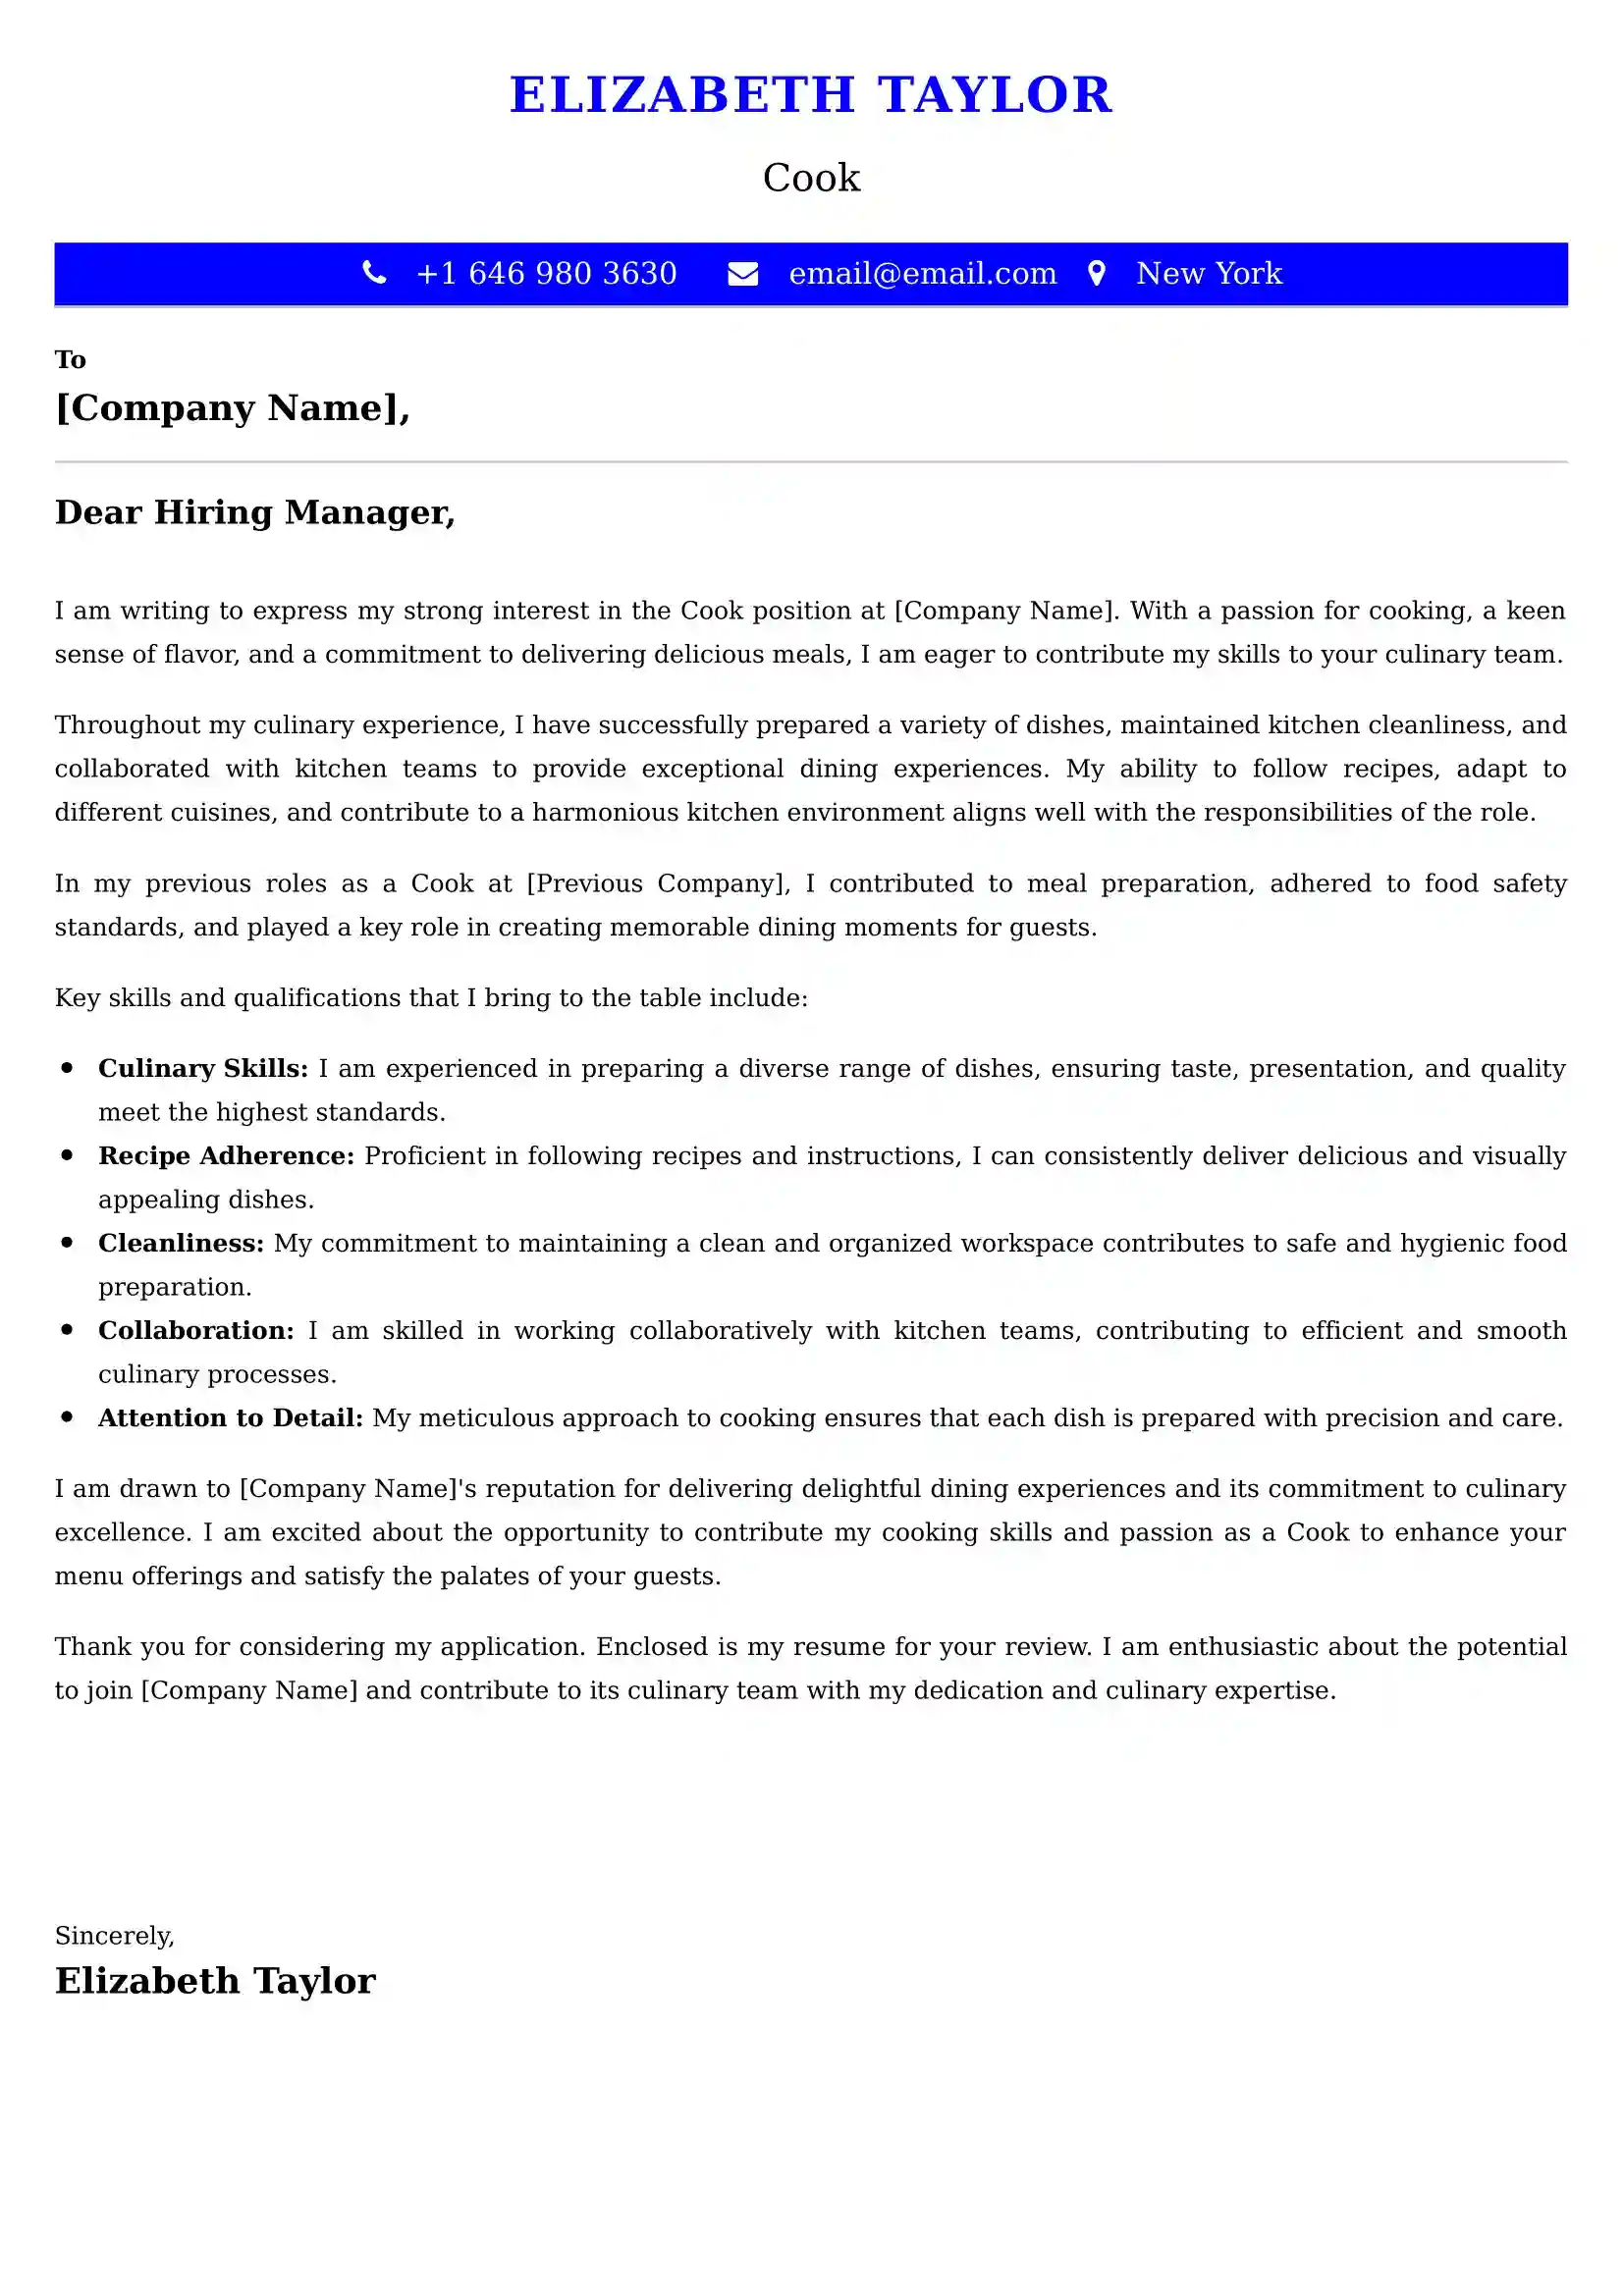 Cook Cover Letter Examples - Latest UK Format